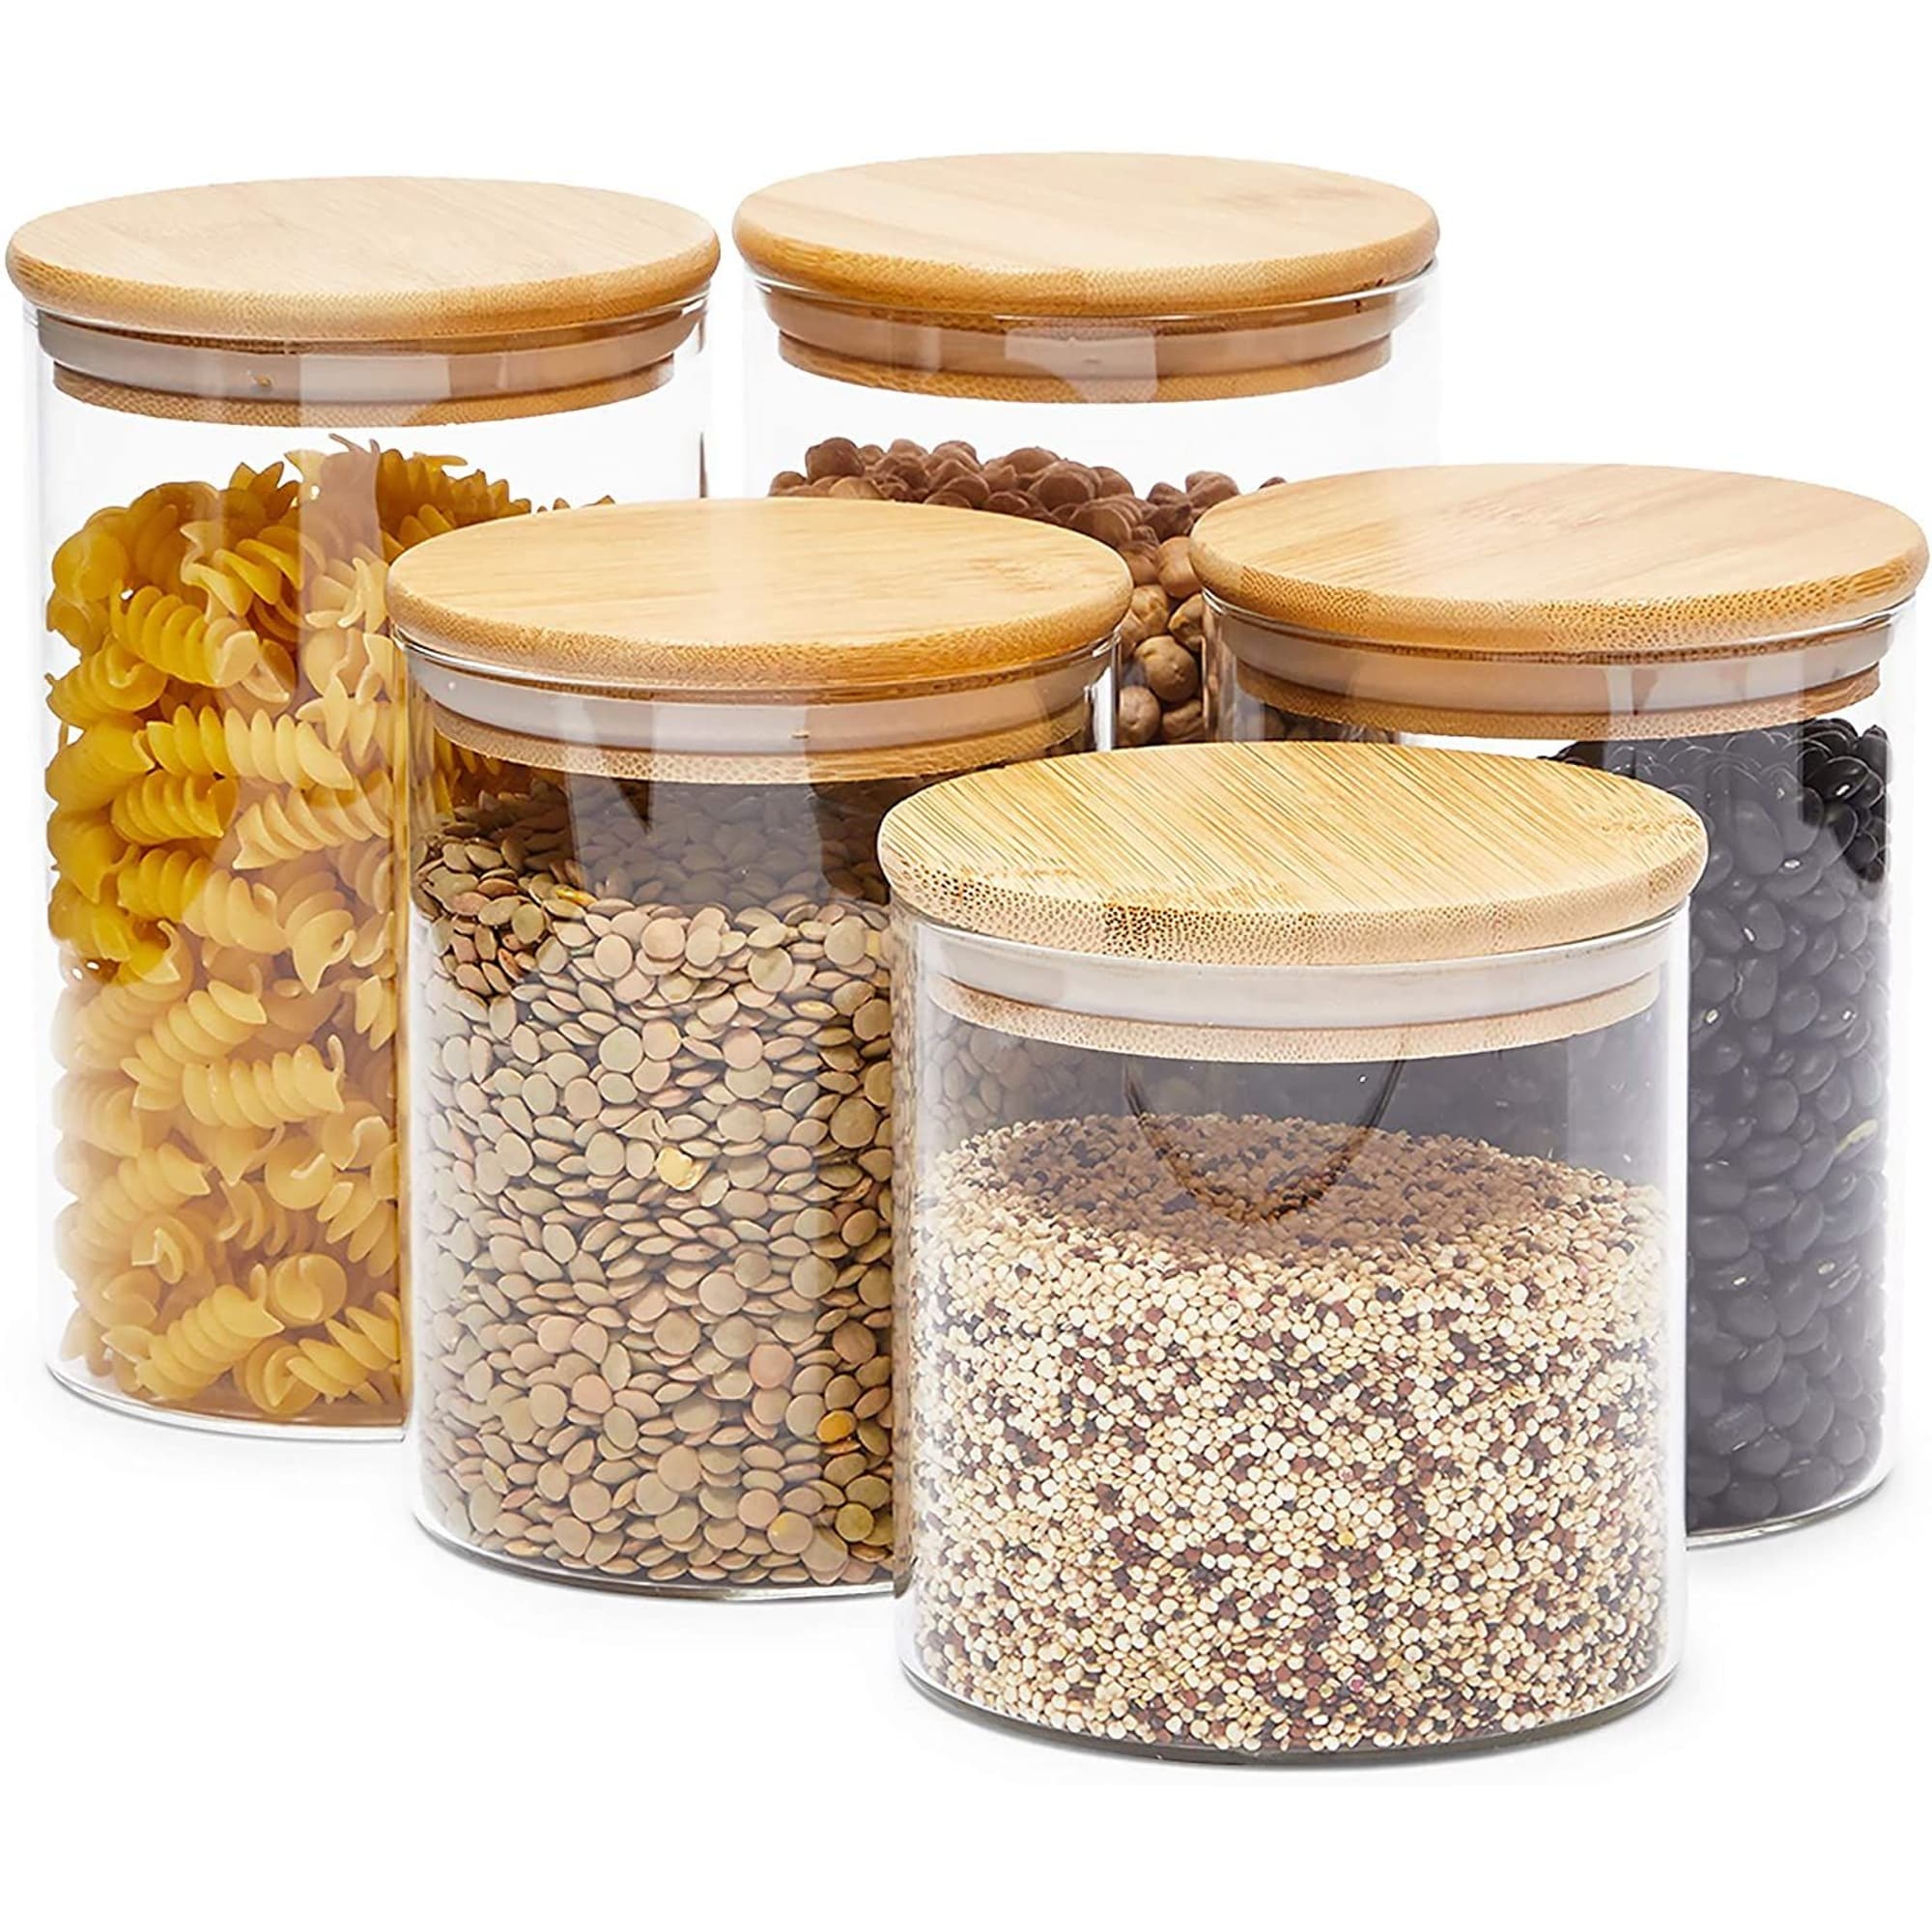 https://ak1.ostkcdn.com/images/products/is/images/direct/32cbae8b4bdea55a47133e647b73d06f268a1c89/Glass-Canisters-with-Airtight-Bamboo-Lids%2C-3-Sizes-for-Pantry-Storage-%285-Pack%29.jpg